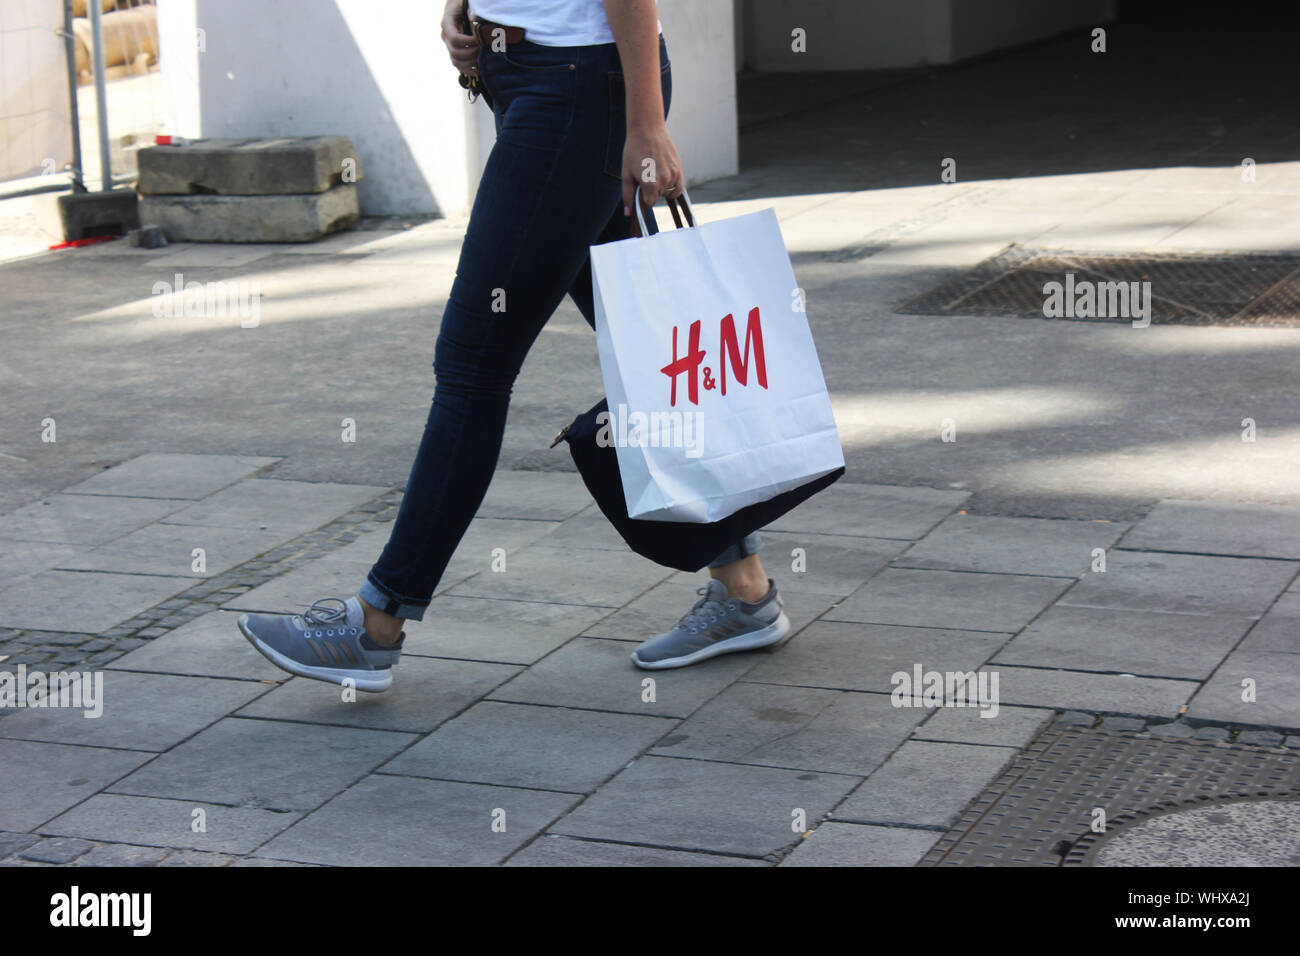 H&m Bag High Resolution Stock Photography and Images - Alamy